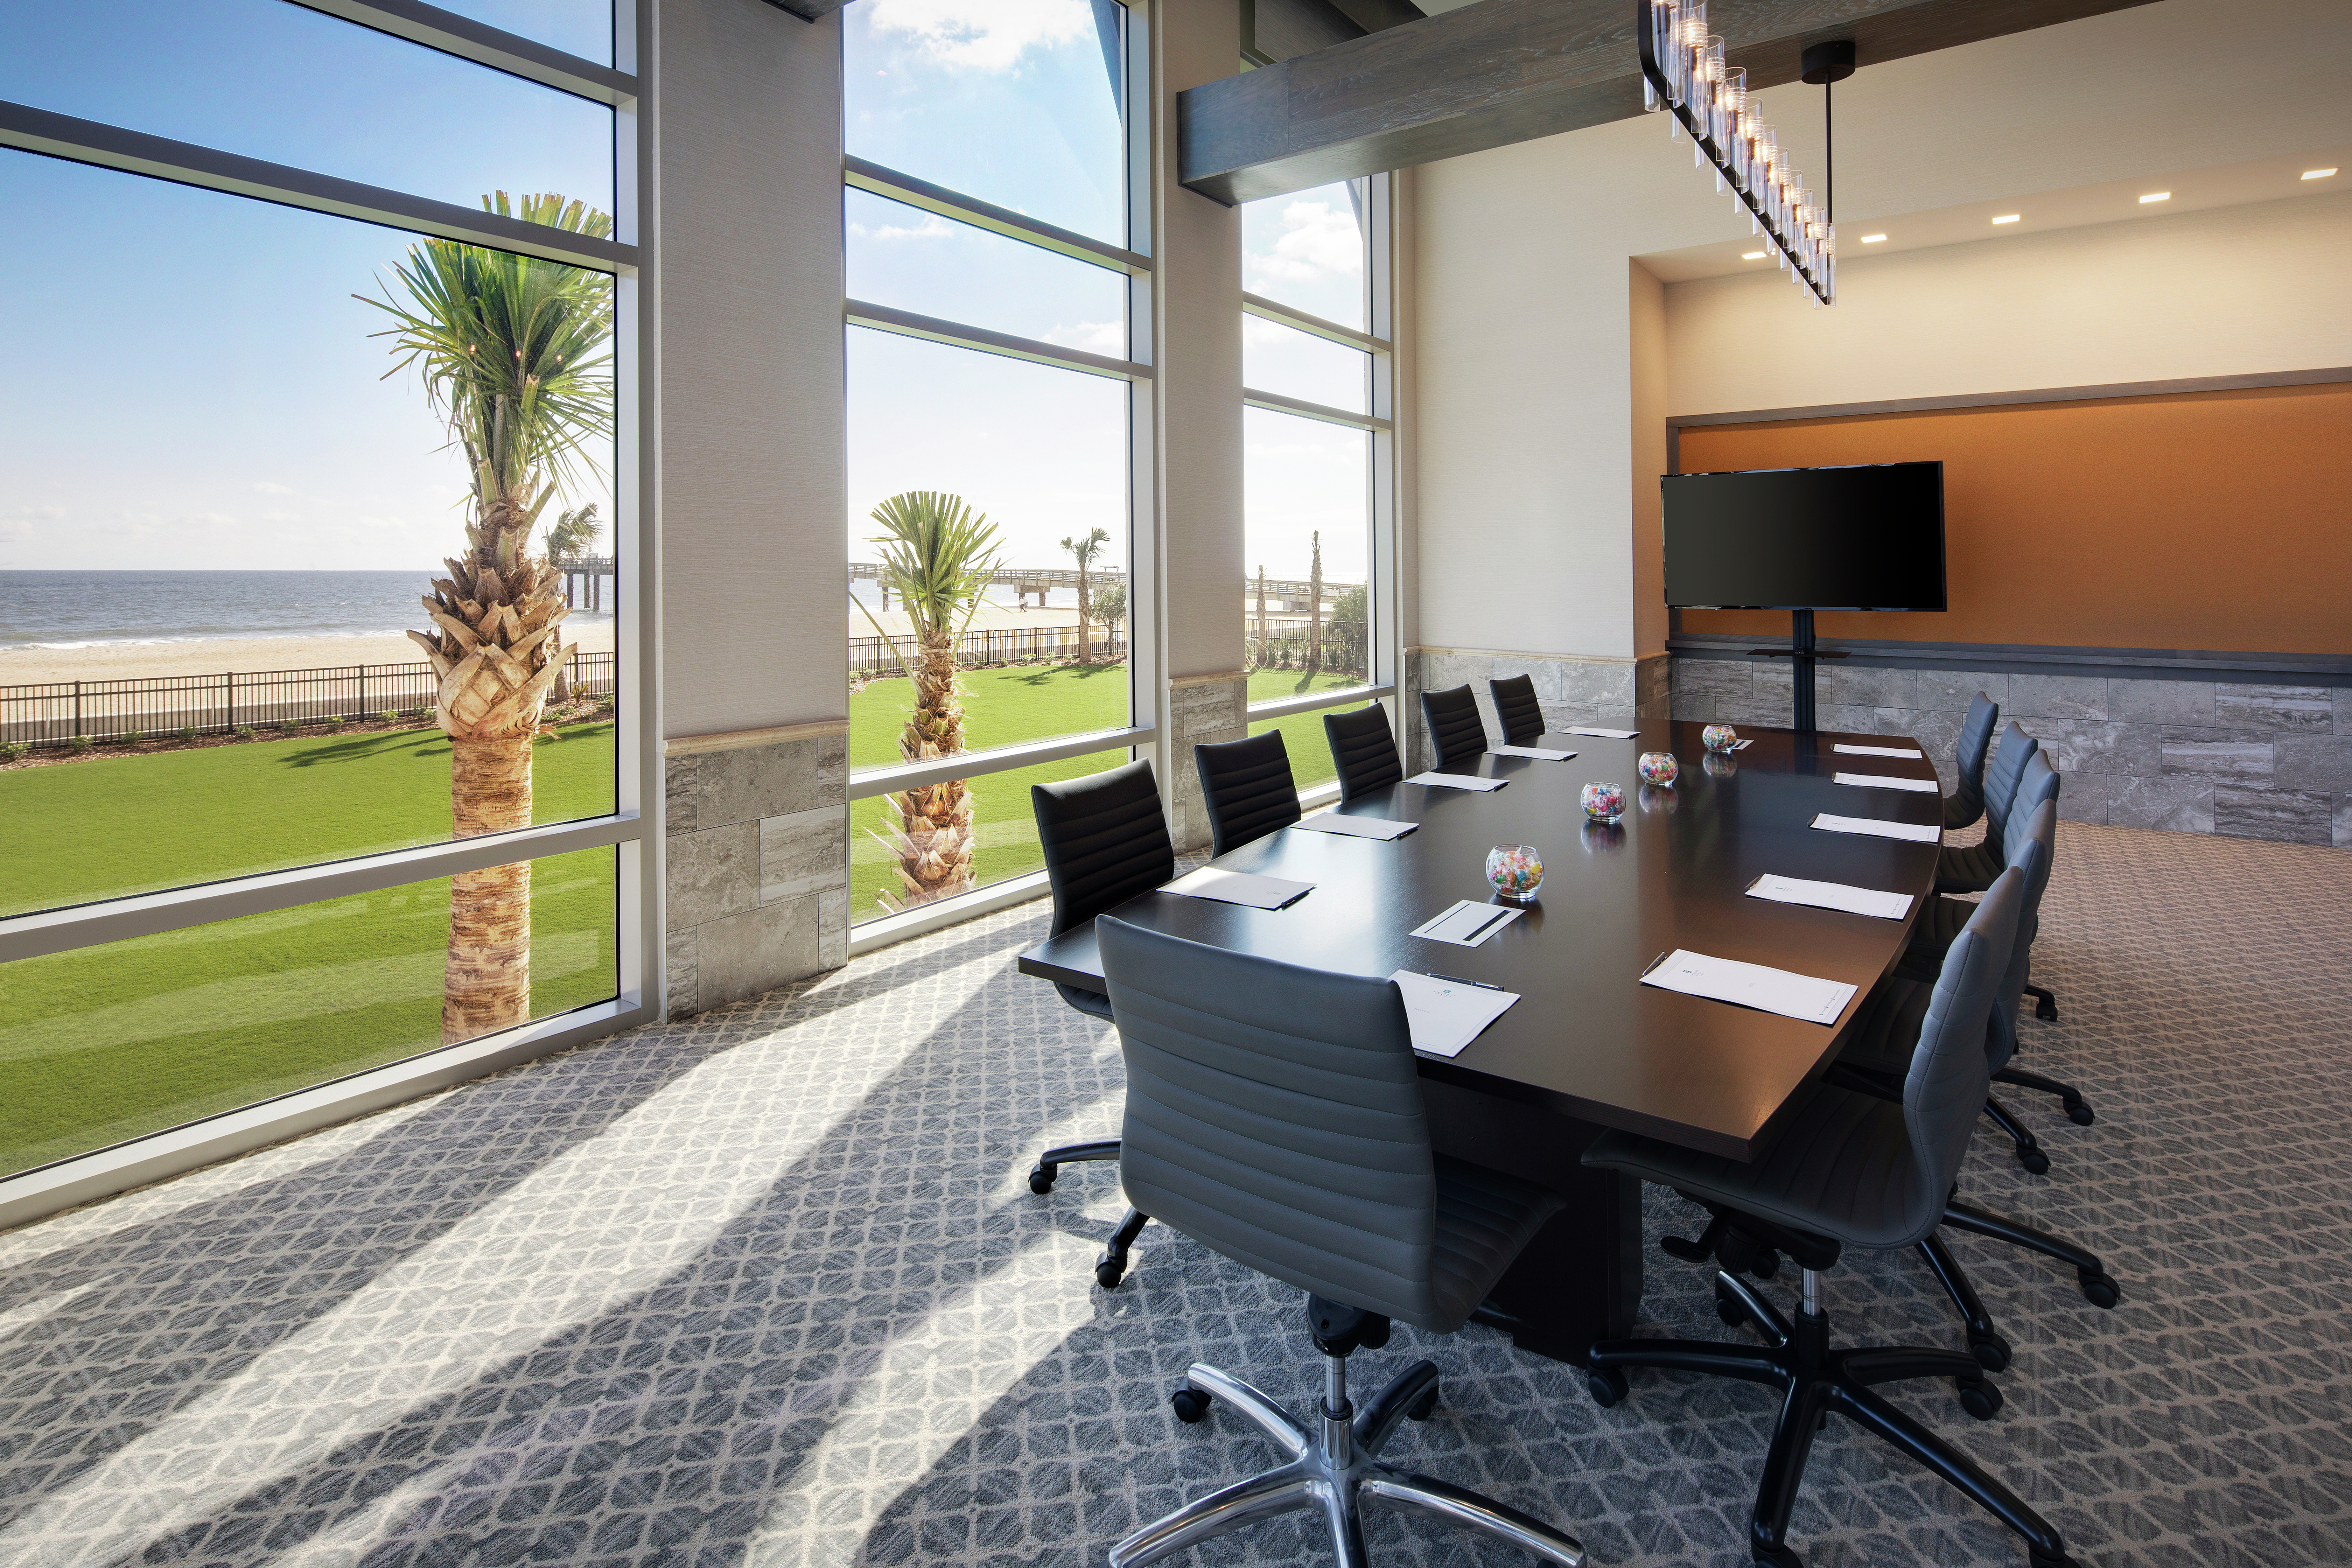 Conference Table, Chairs, and Monitor in Surf Crest Boardroom with Ocean View